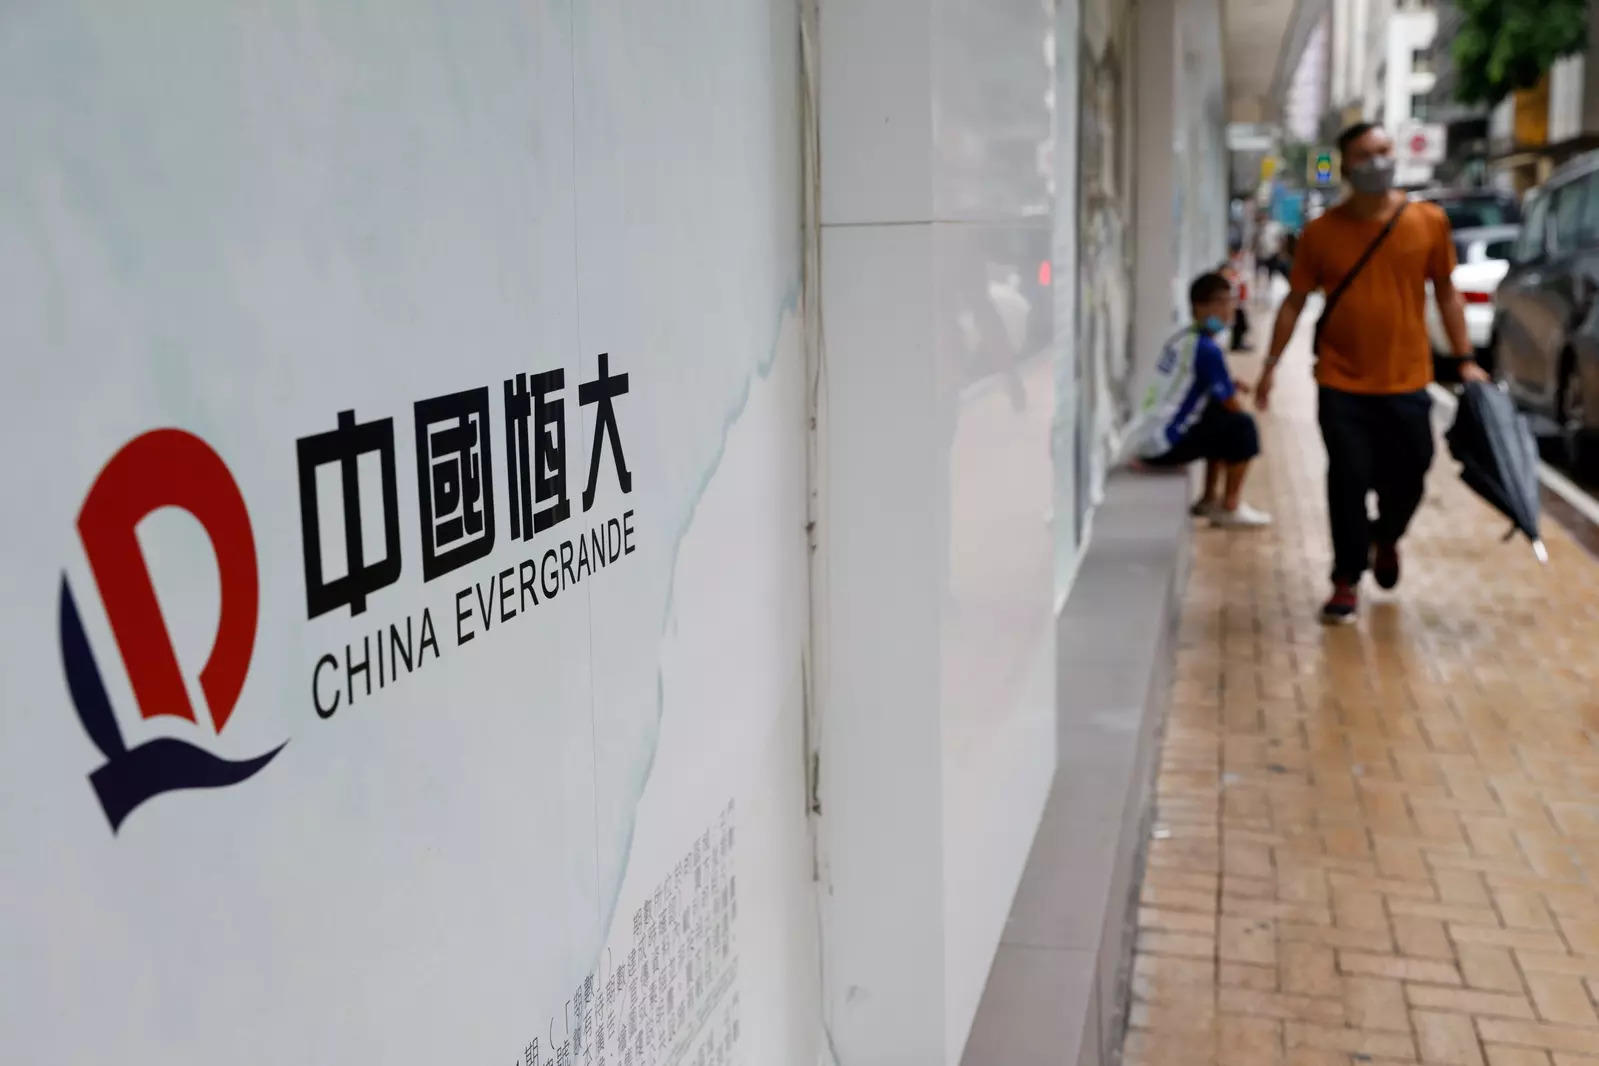 The logo of China Evergrande is seen at outside China Evergrande Centre building in Hong Kong (File photo)